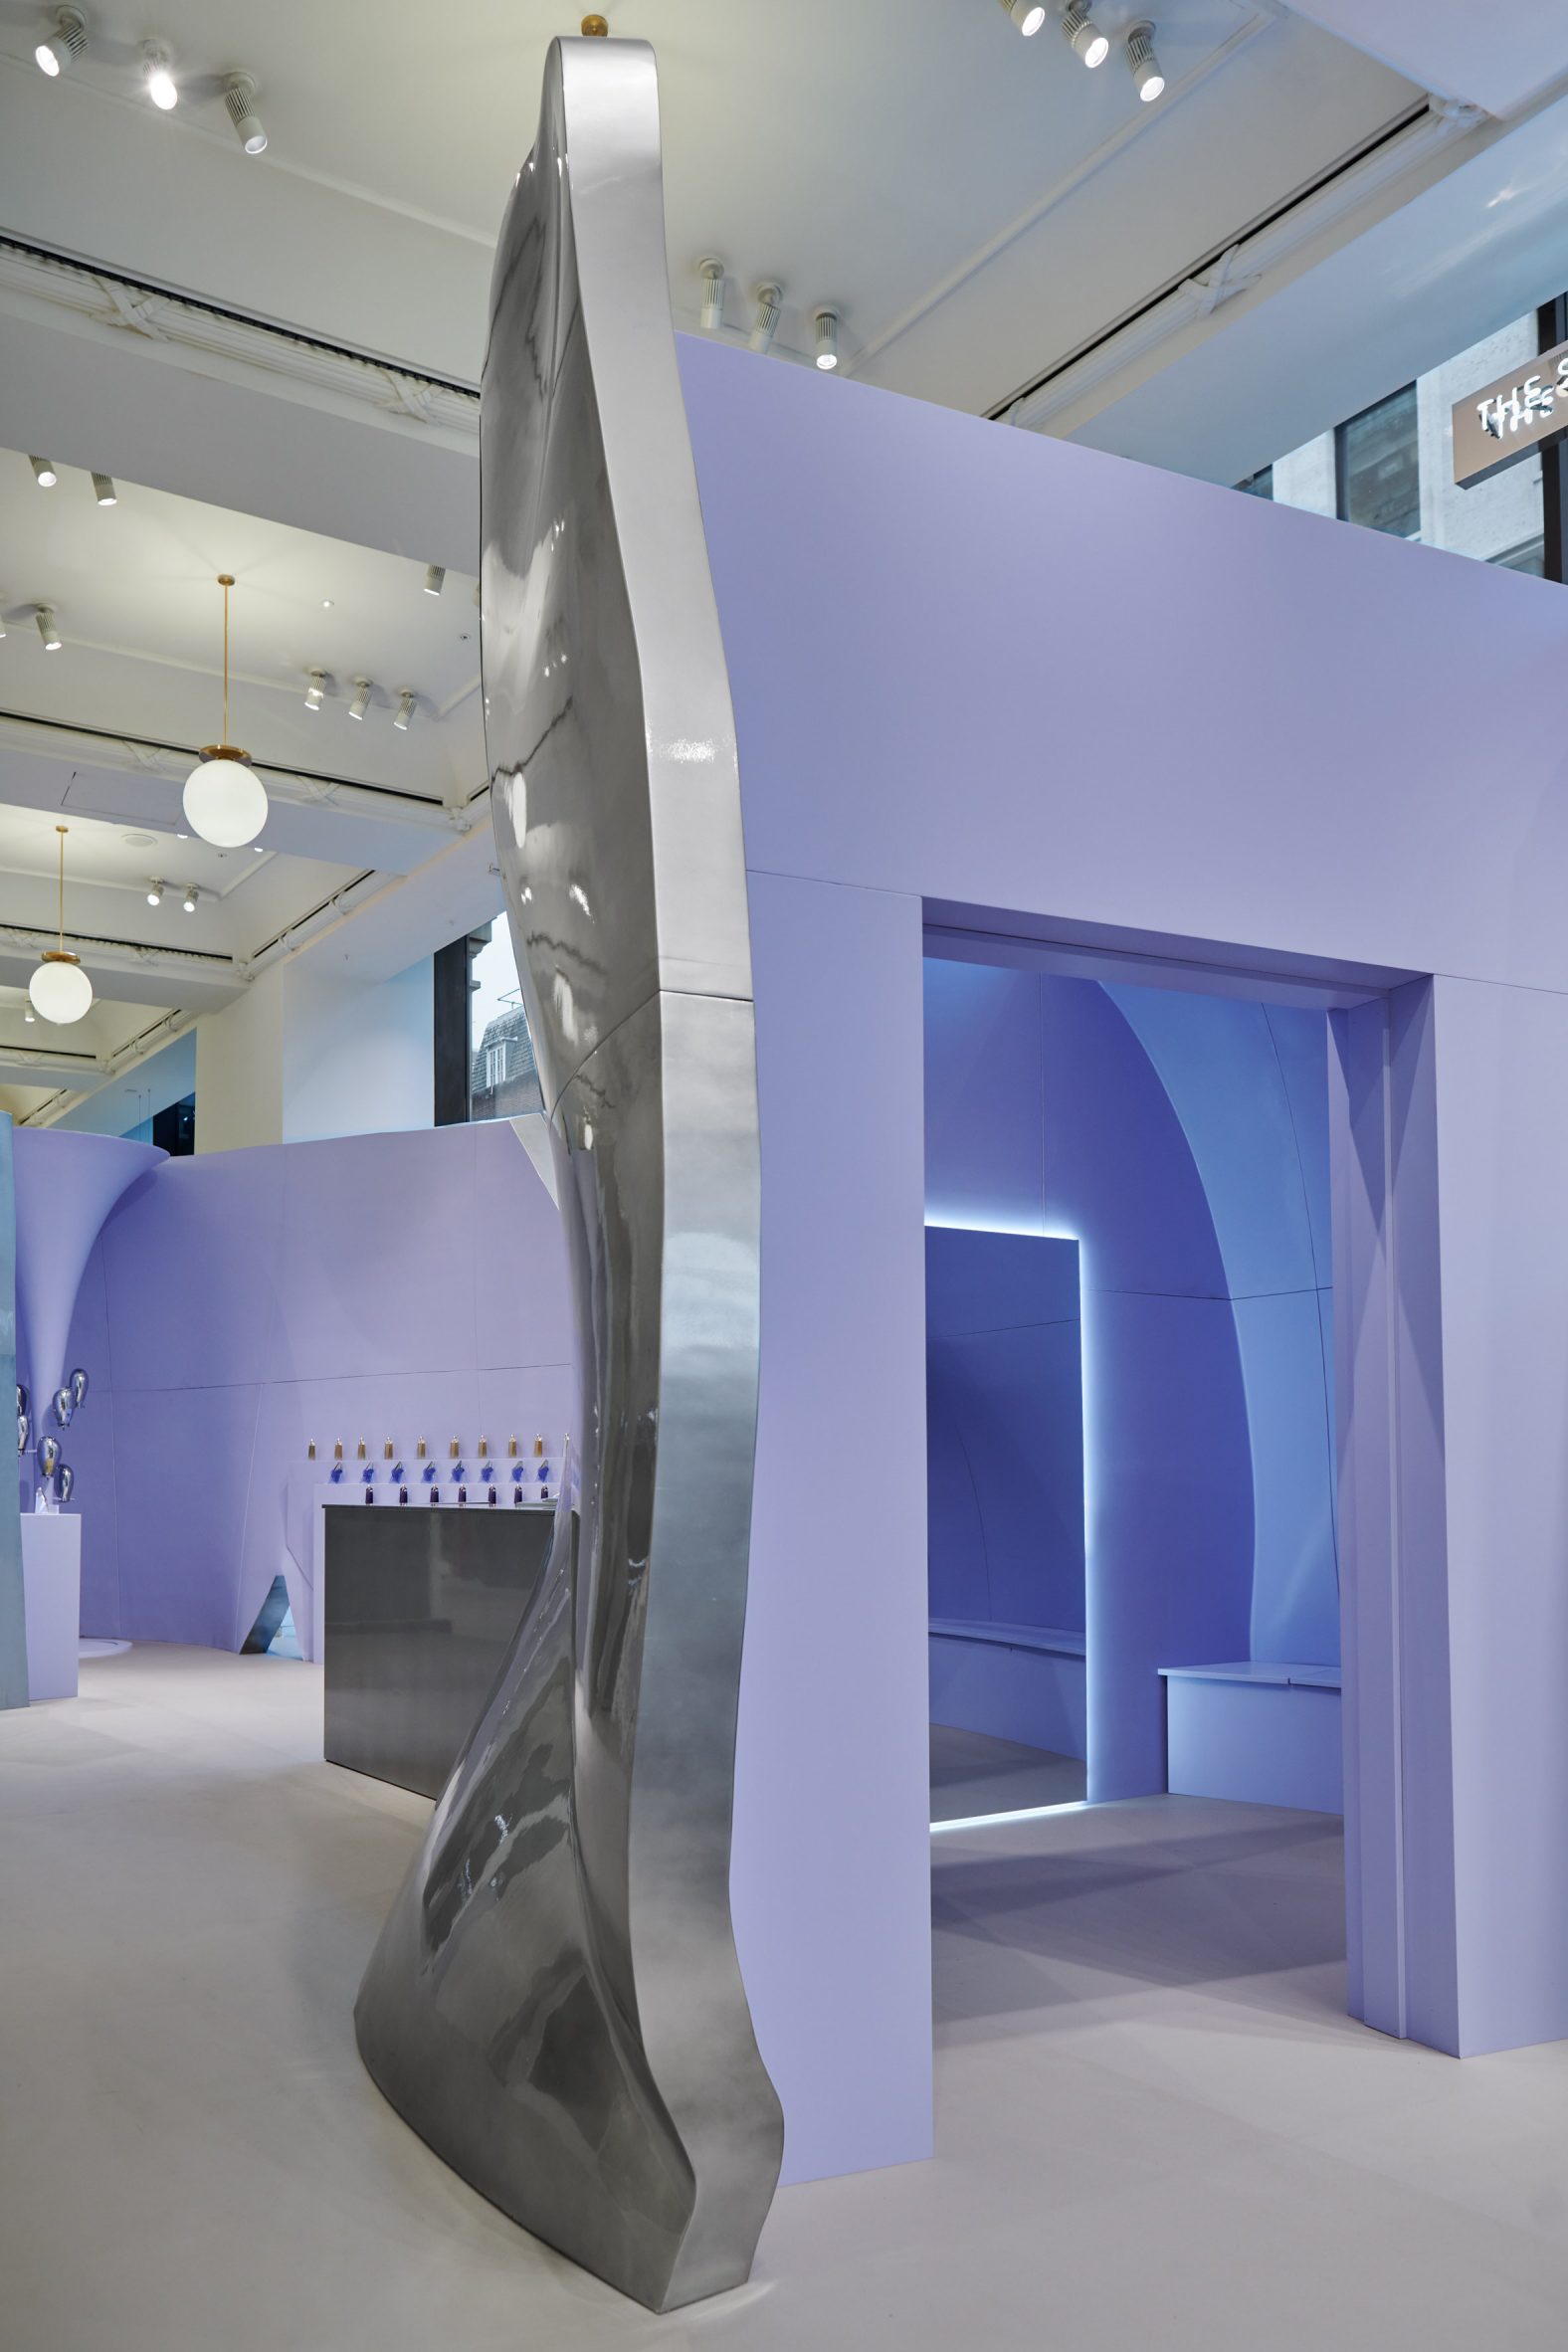 Image of a blue-painted fitting room that was built into the walls of the pop-up